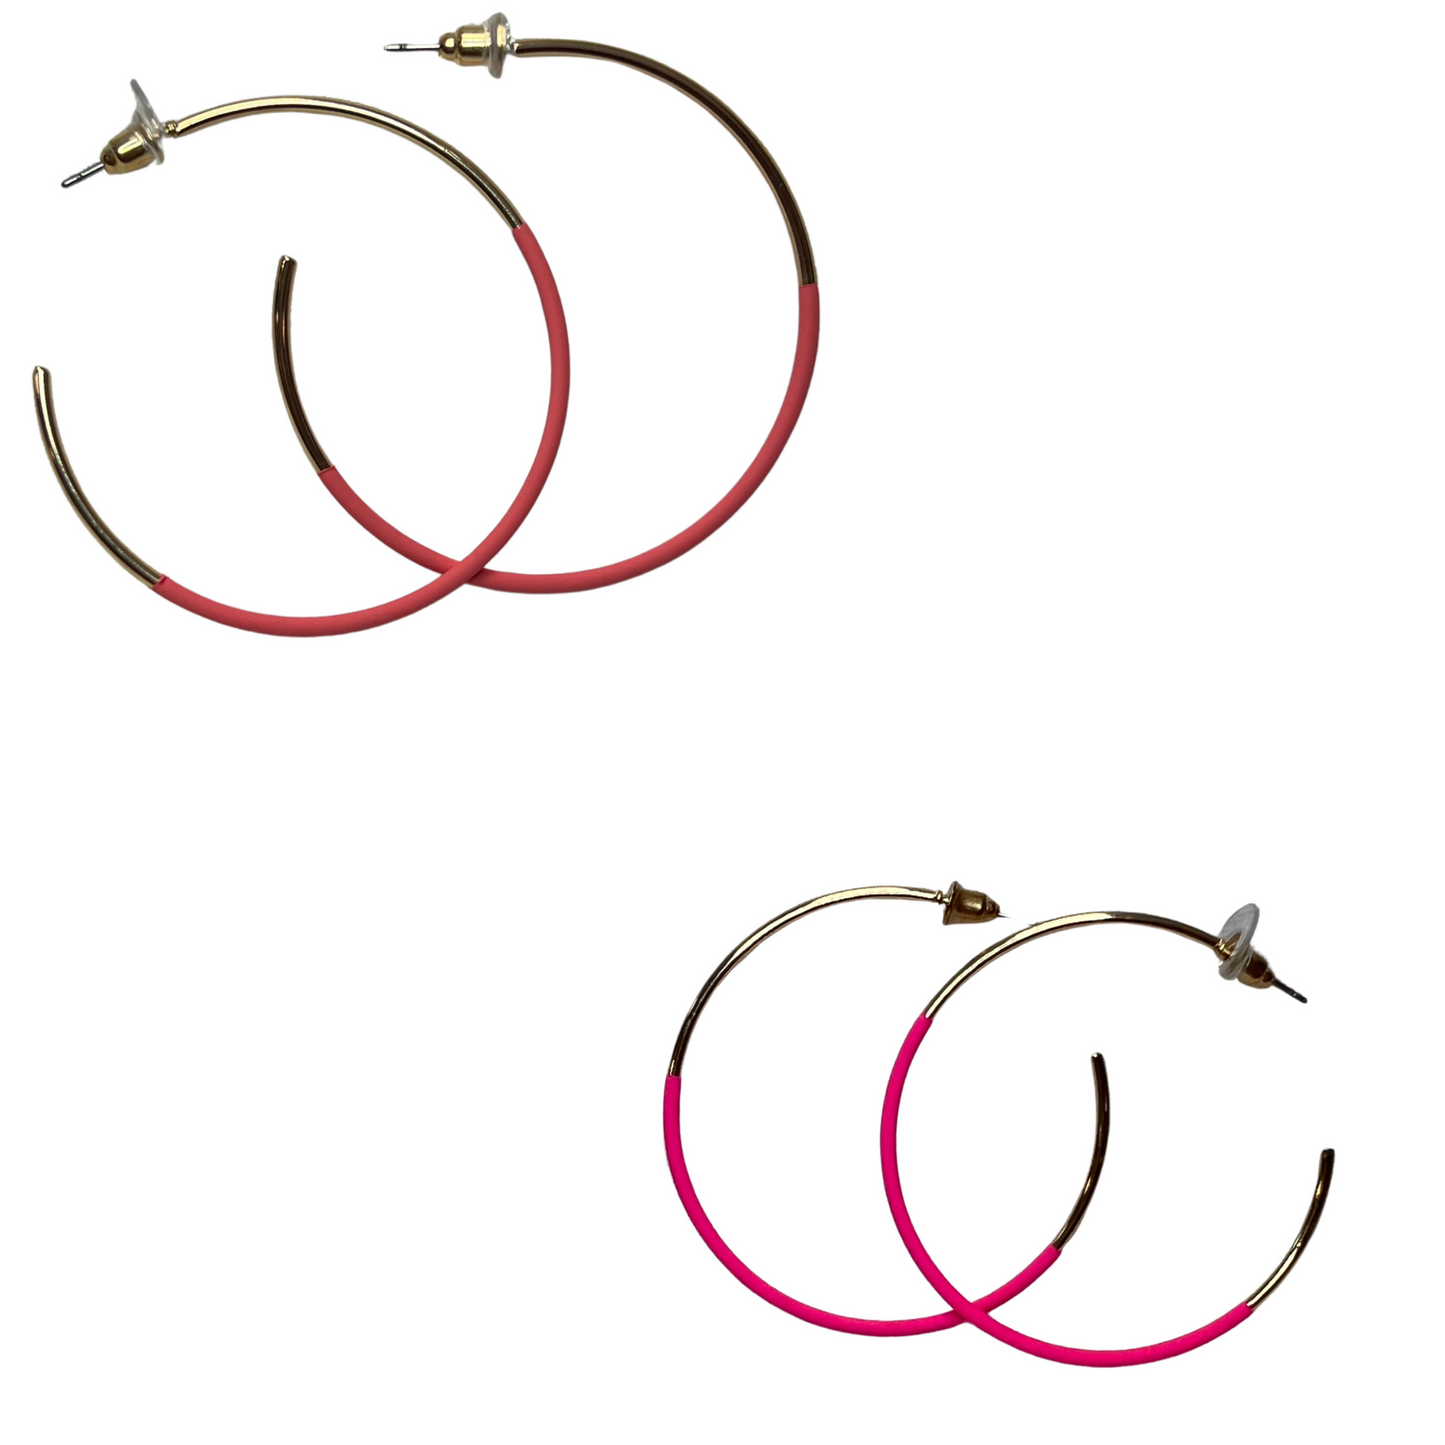 Colored Hoops offer a variety of colors and gold accents for an eye-catching look. Perfect for any occasion, these hoops are ideal for adding a pop of color to any outfit.